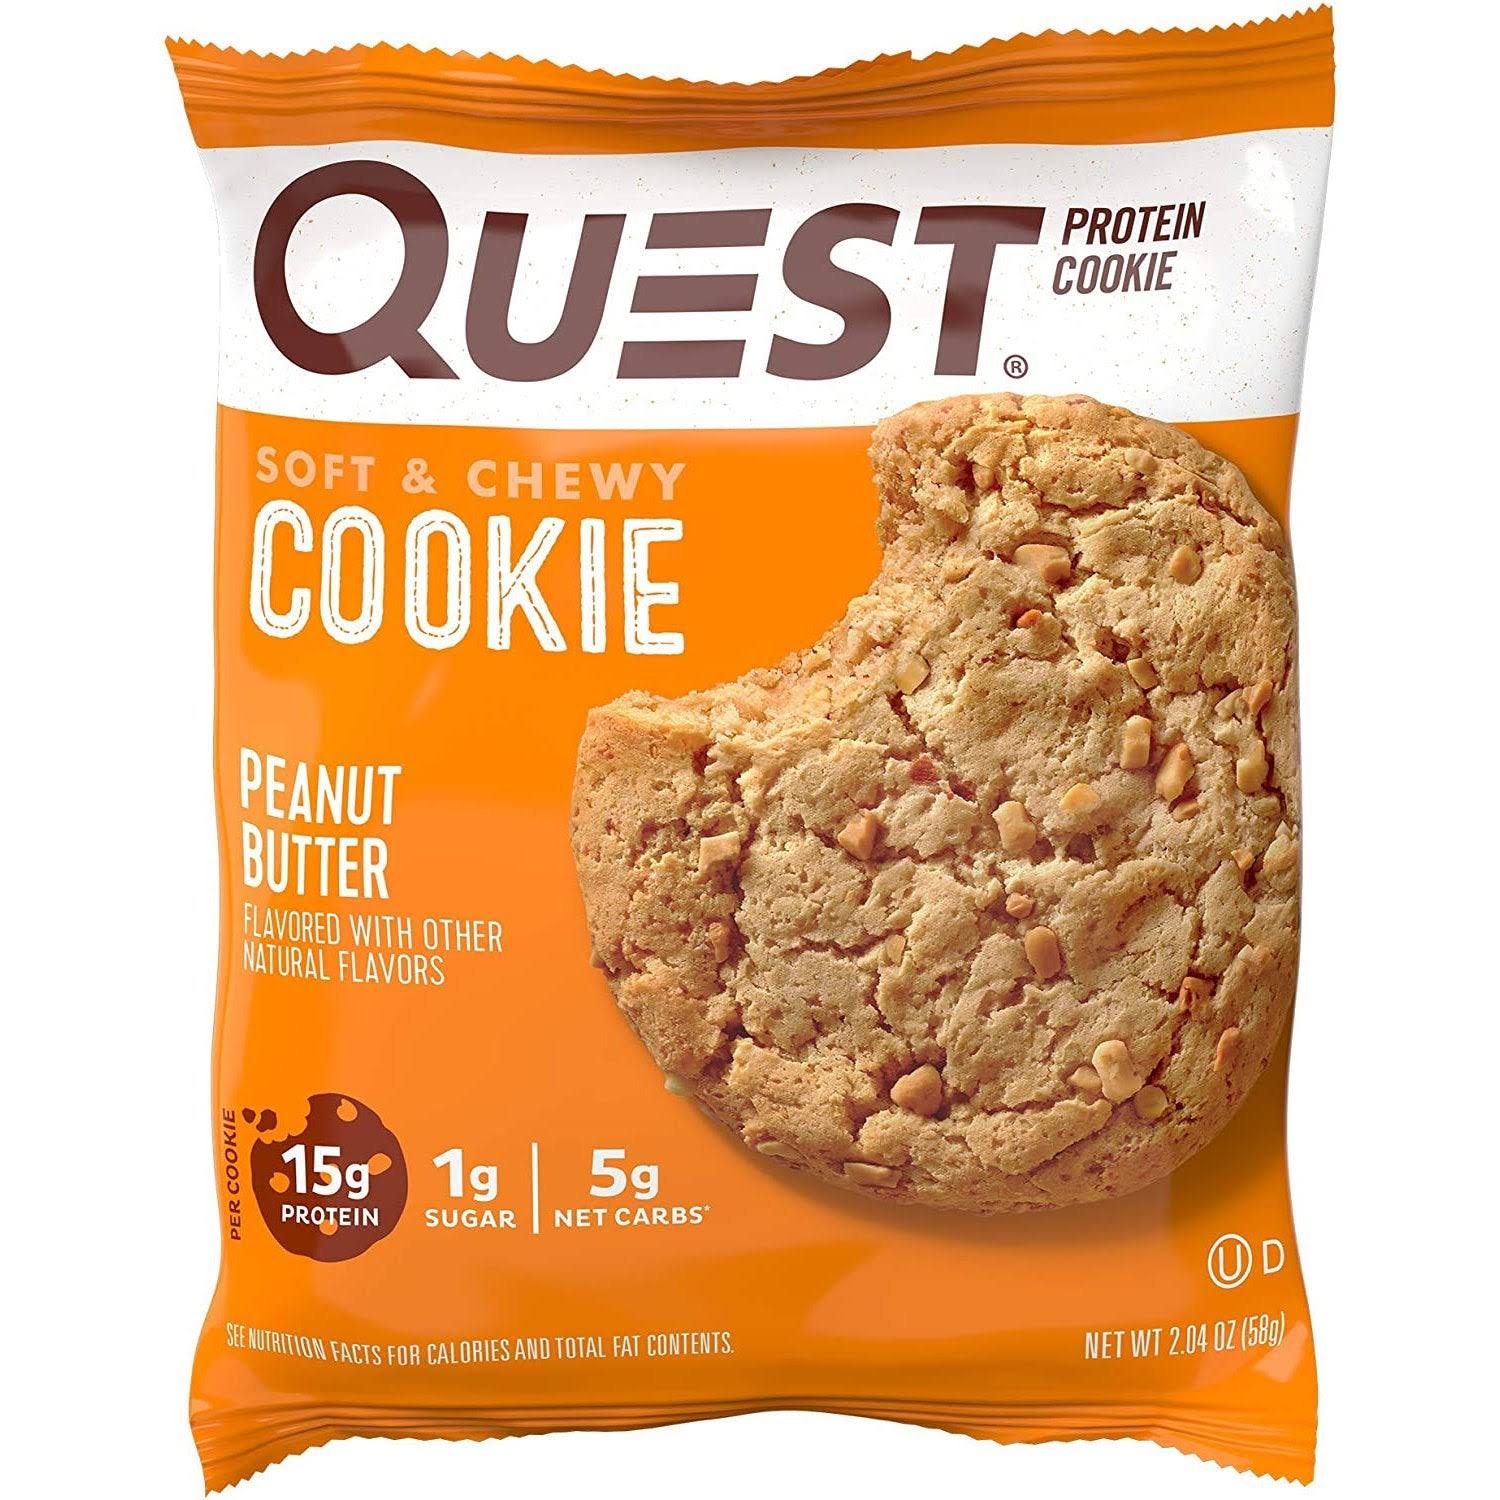 Quest Cookie - Peanut Butter Protein